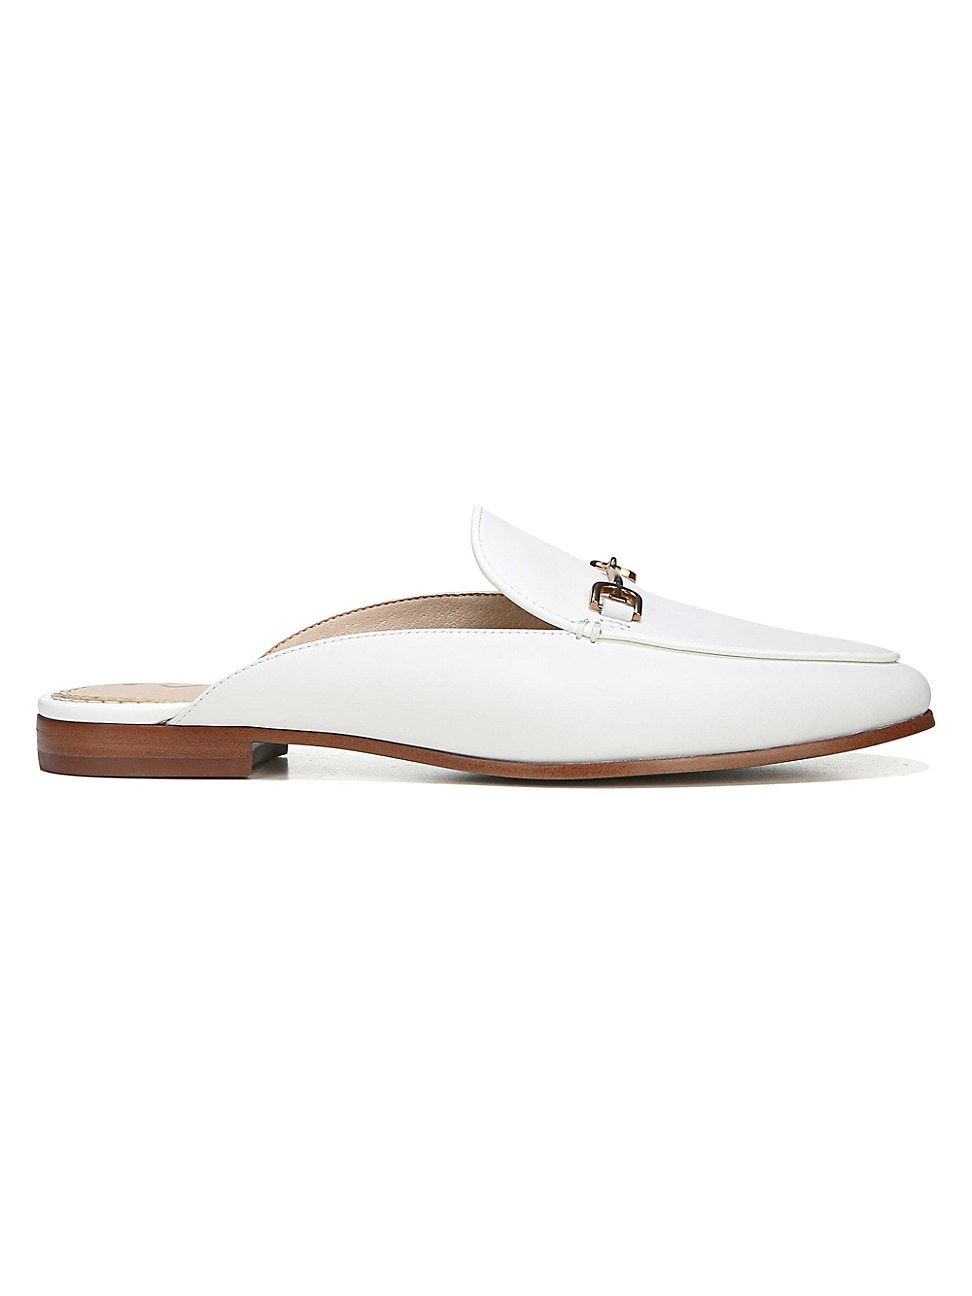 Sam Edelman Women's Linnie Leather Loafer Mules - White - Size 10 | Saks Fifth Avenue